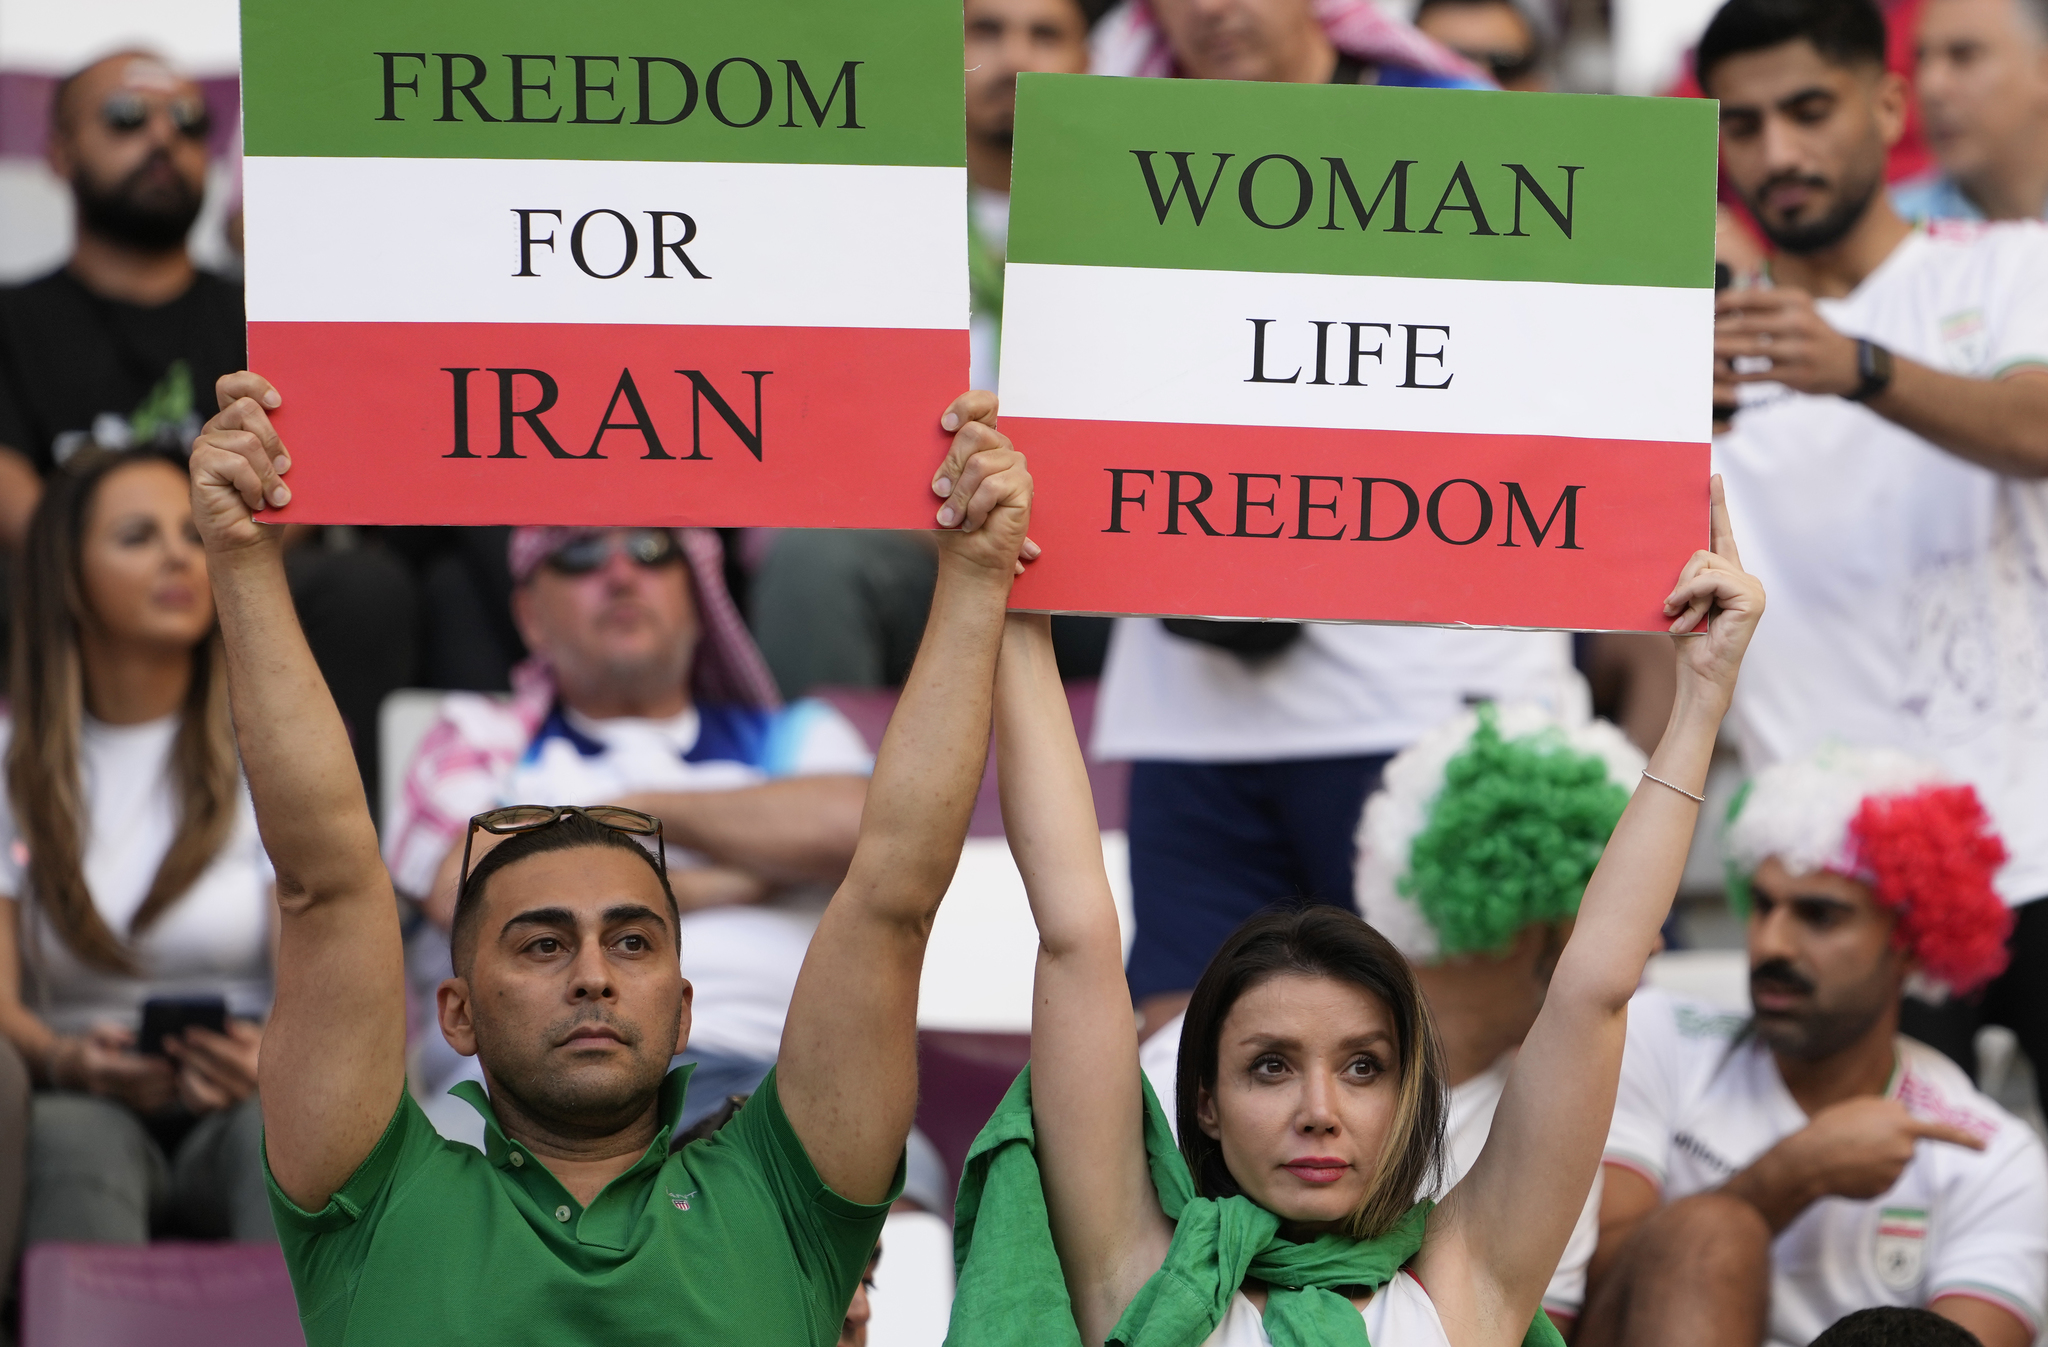 Iranian soccer fans hold up signs reading Woman Life Freedom and Freedom For  lt;HIT gt;Iran lt;/HIT gt;, prior to the World Cup group B soccer match between  lt;HIT gt;England lt;/HIT gt; and  lt;HIT gt;Iran lt;/HIT gt; at the Khalifa International Stadium in in Doha, Qatar, Monday, Nov. 21, 2022. (AP Photo/Alessandra Tarantino)